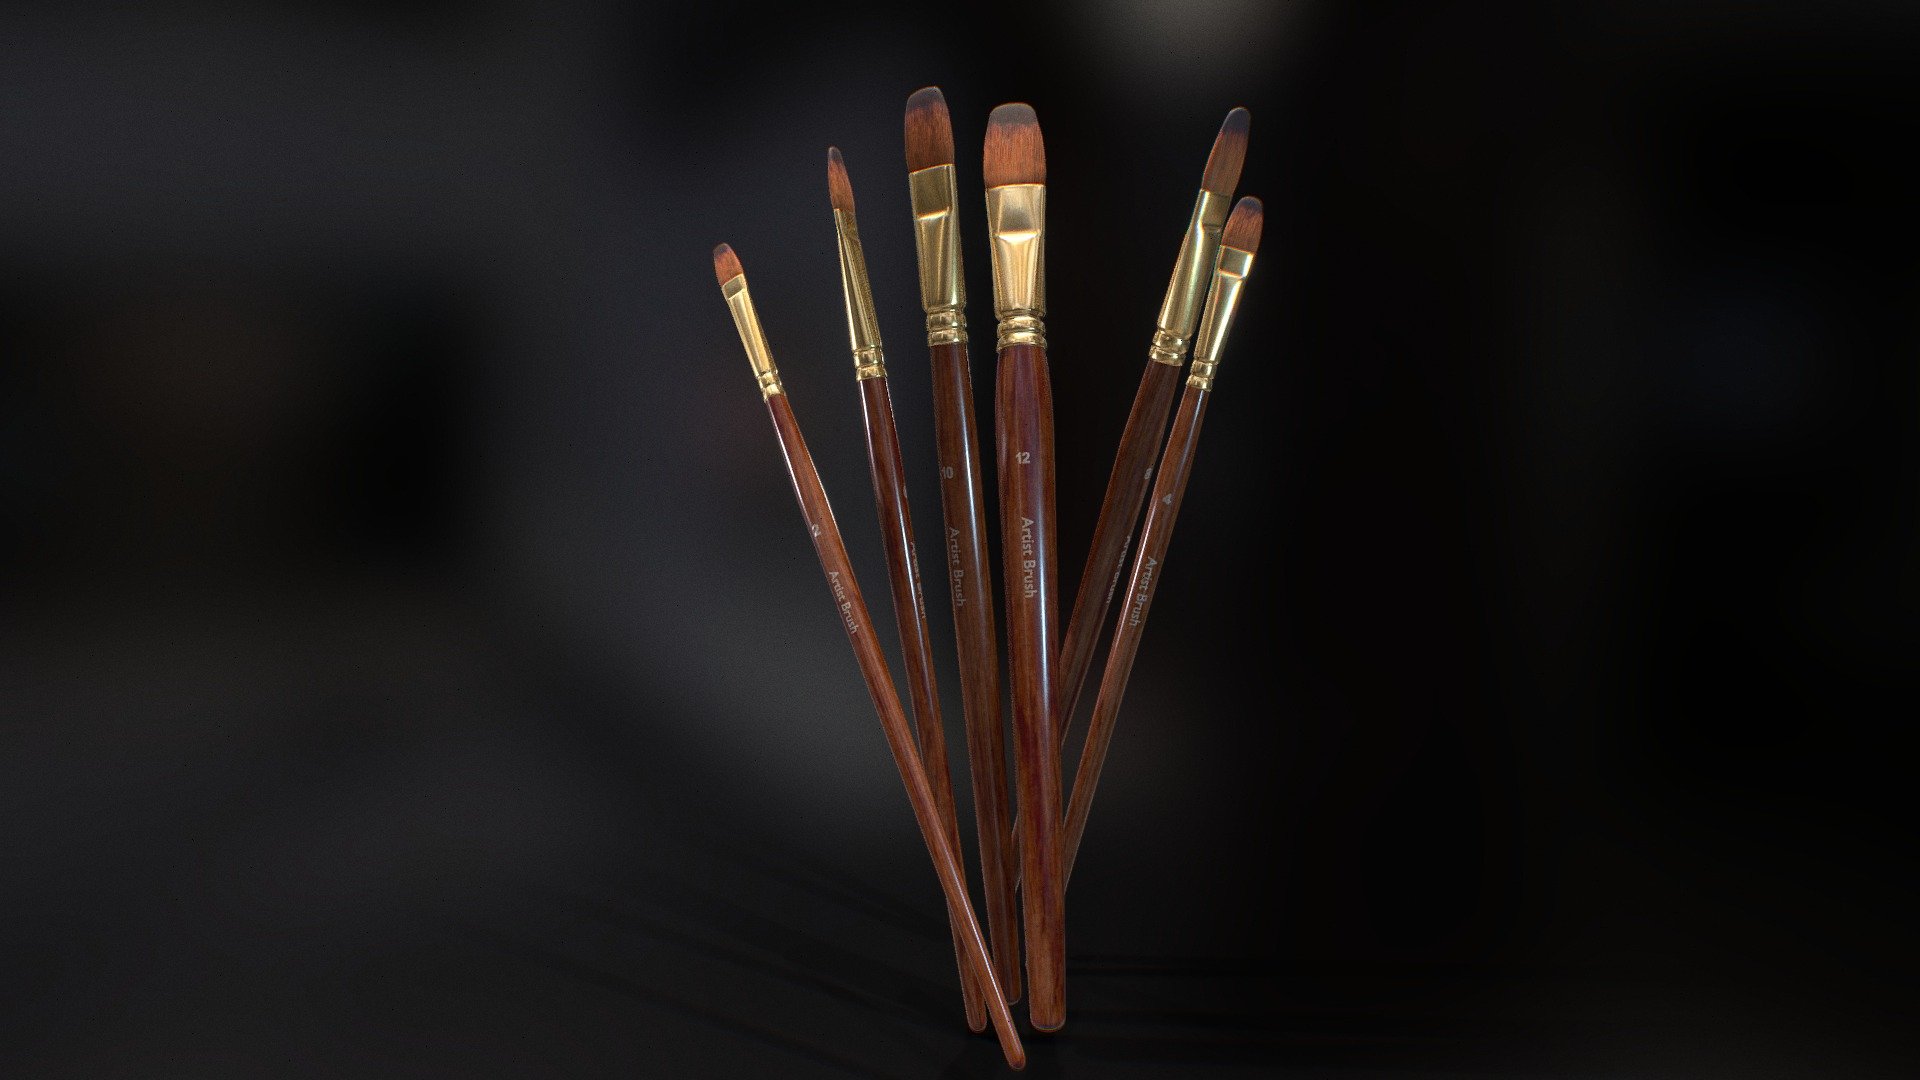 This are 3d models of brush set for using in water color painting. It is can be used as an art and drawing supplies for schools in games and many other painting related scenes. This set includes 5 different brush sizes all are lowpoly and quads.

This model is created in 3DsMax and textured in Substance Painter.

This models are made in real world product dimensions.

High quality of PBR textures are available to download.

Maps include - Base Color, AO, Normal, Metallic, and Roughness Textures 3d model